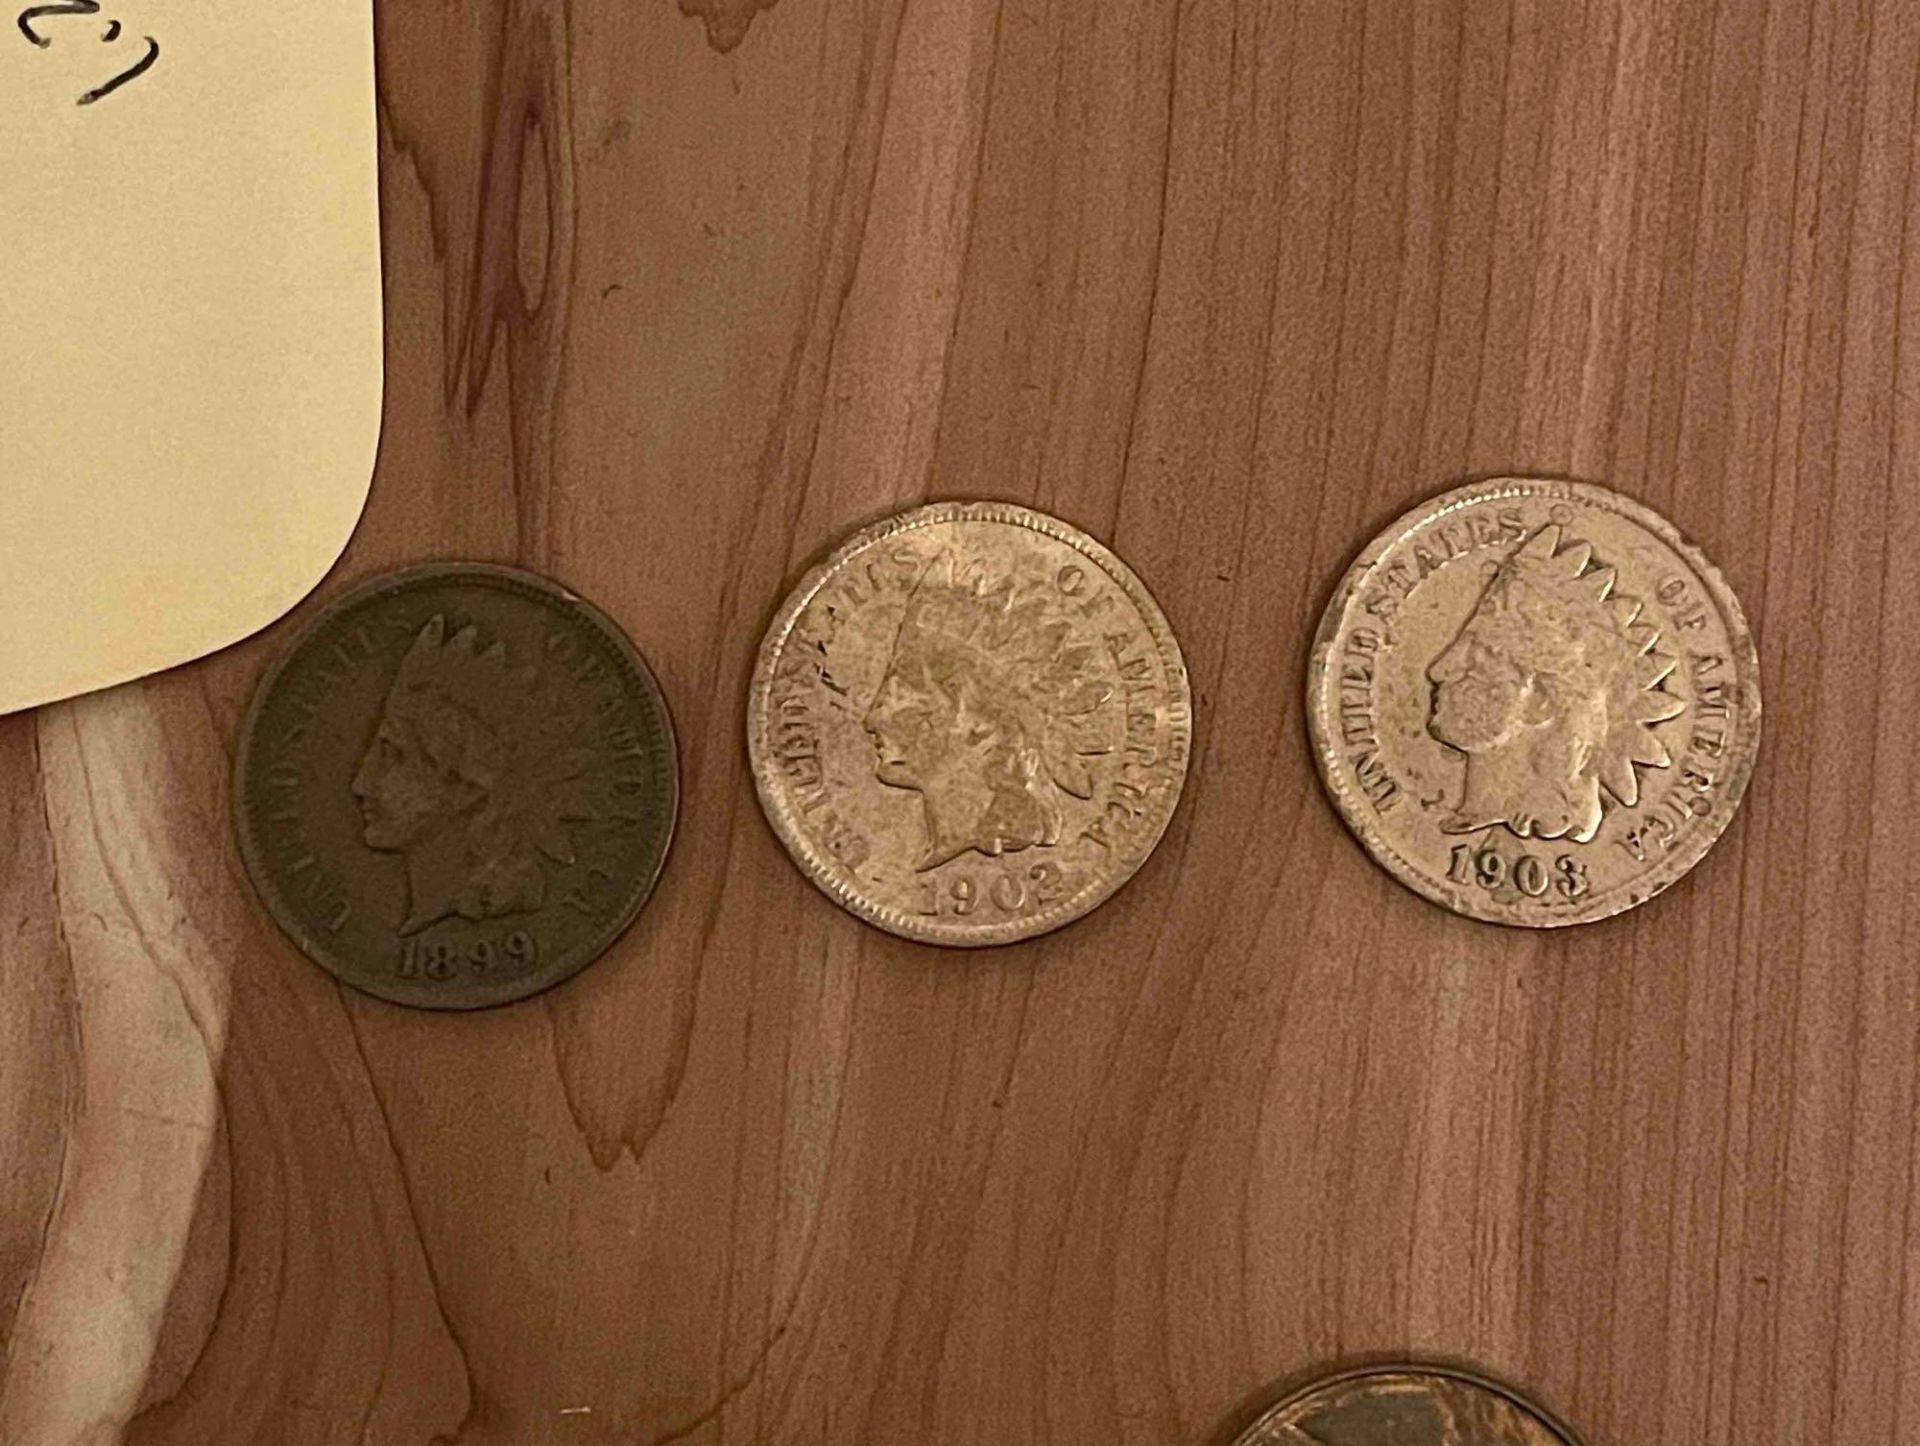 Pennies - Image 3 of 5